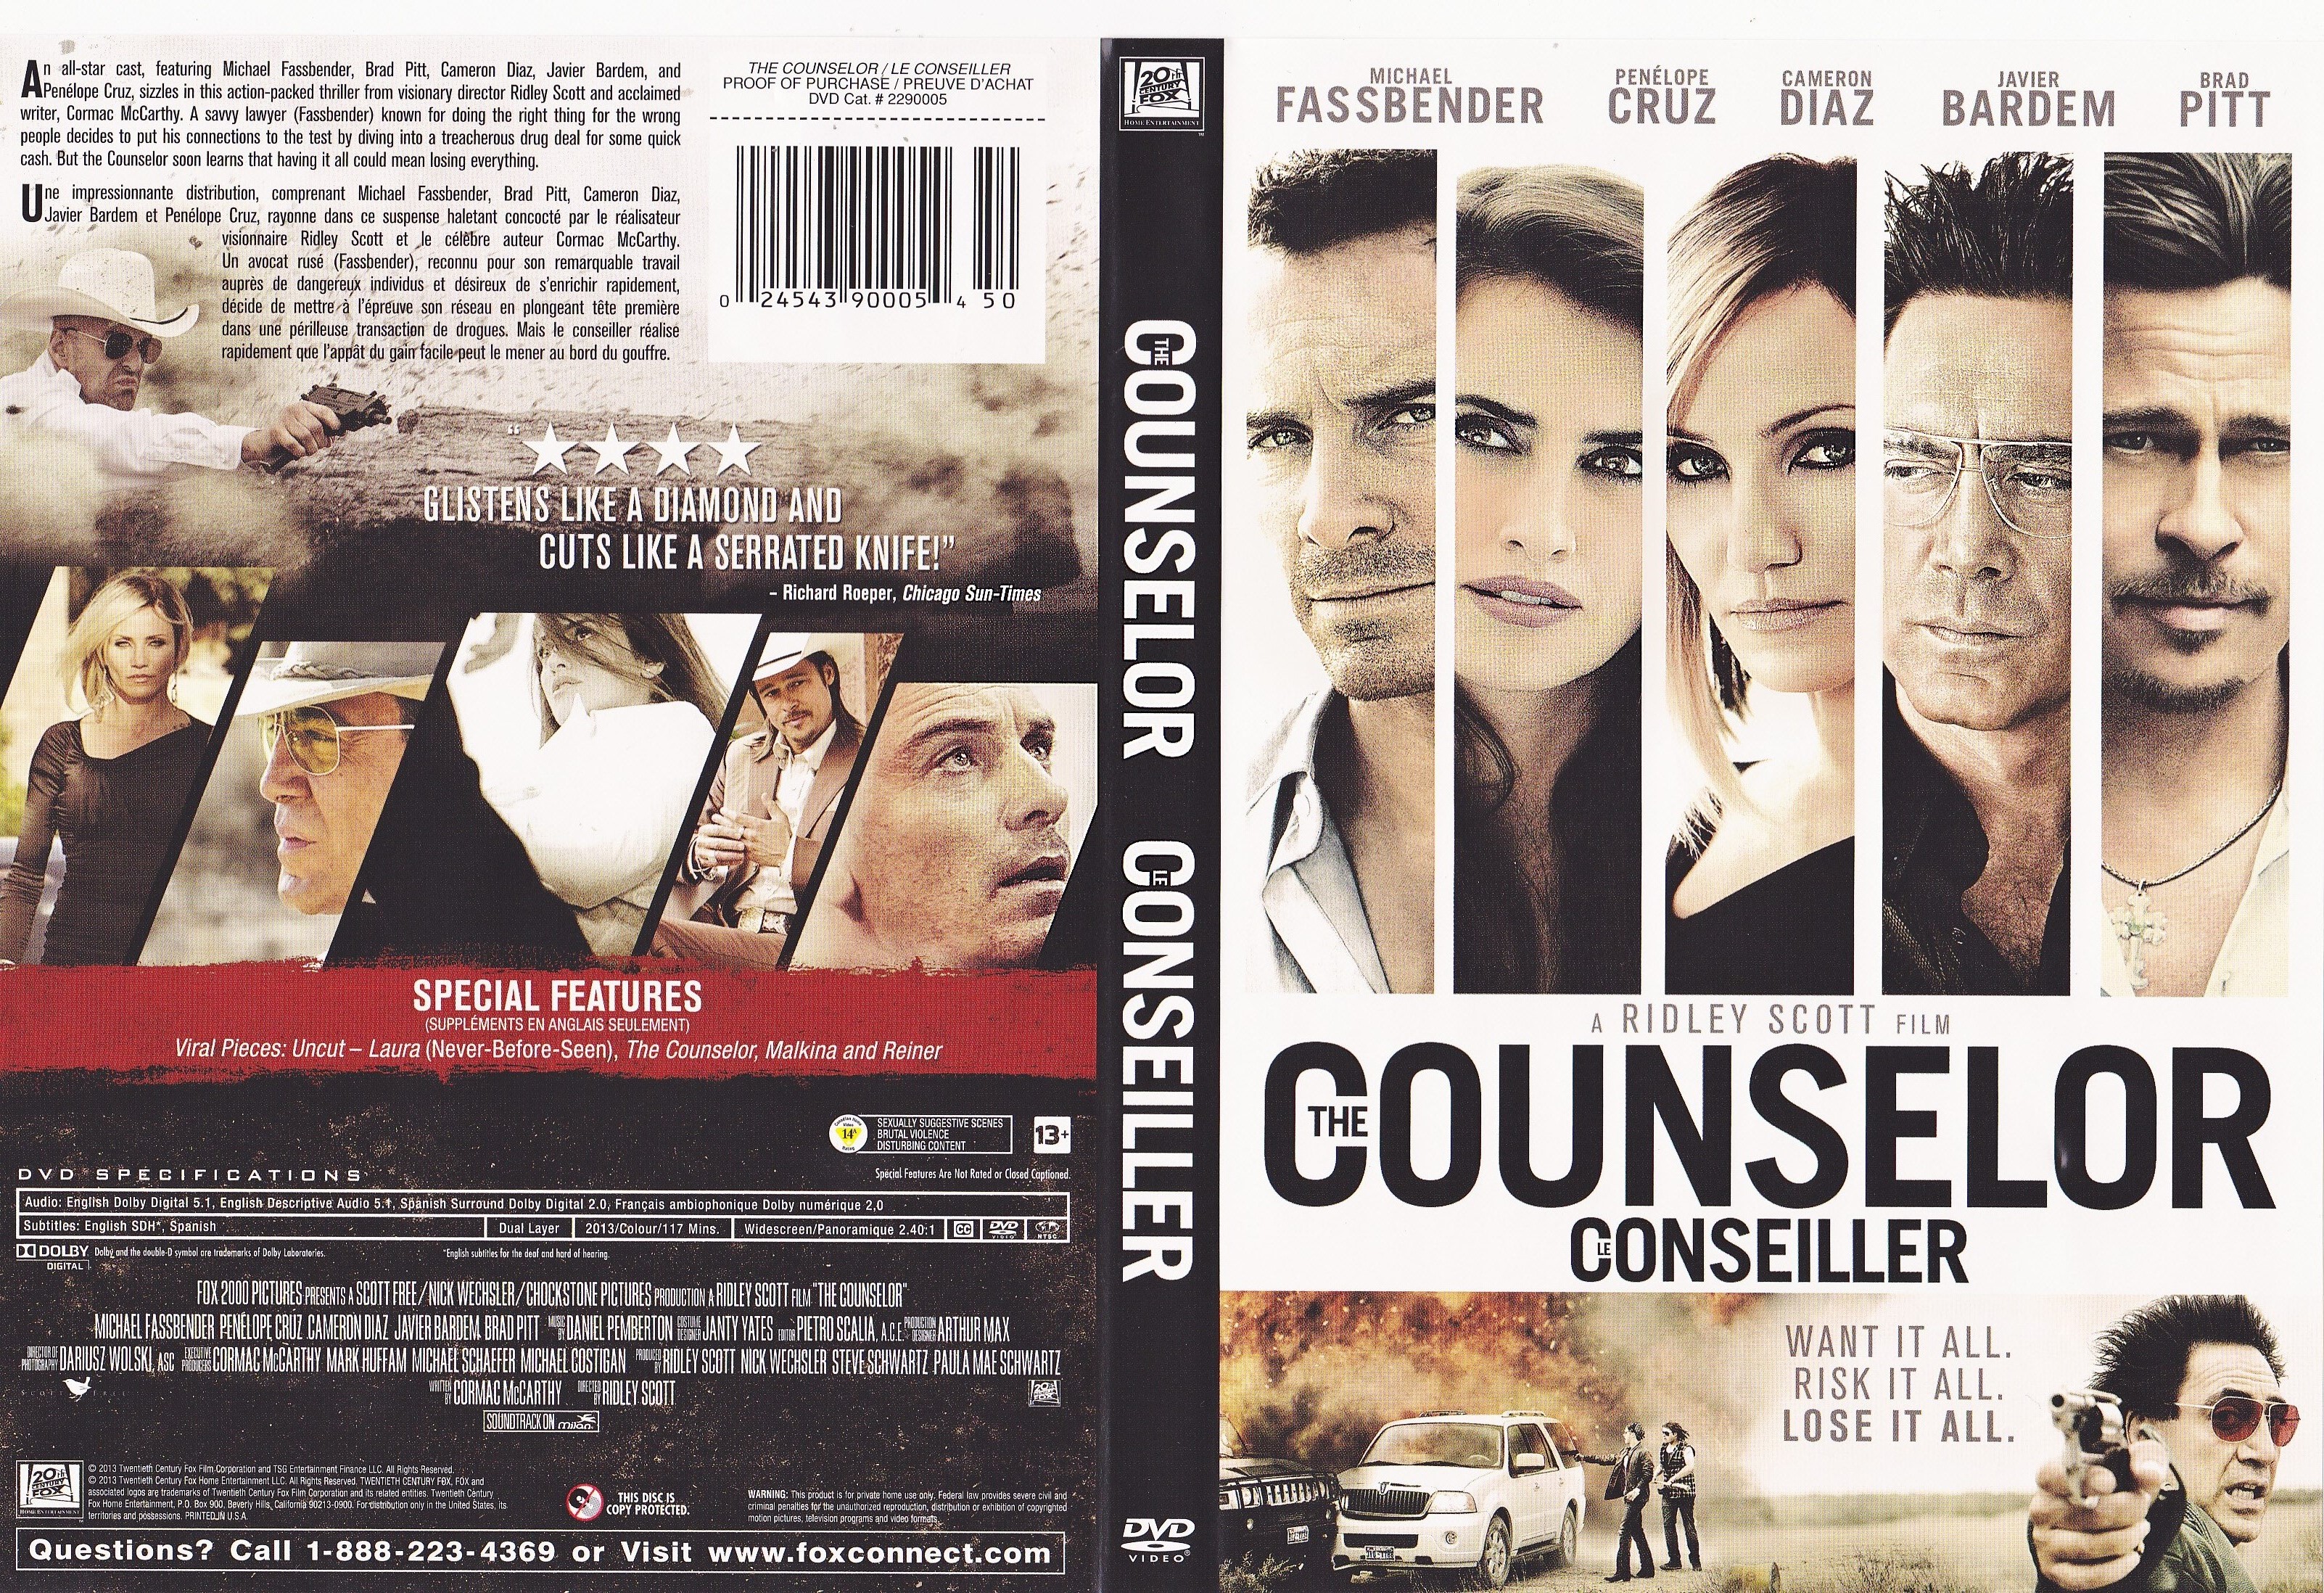 Jaquette DVD The counselor - Le conseiller (Canadienne)